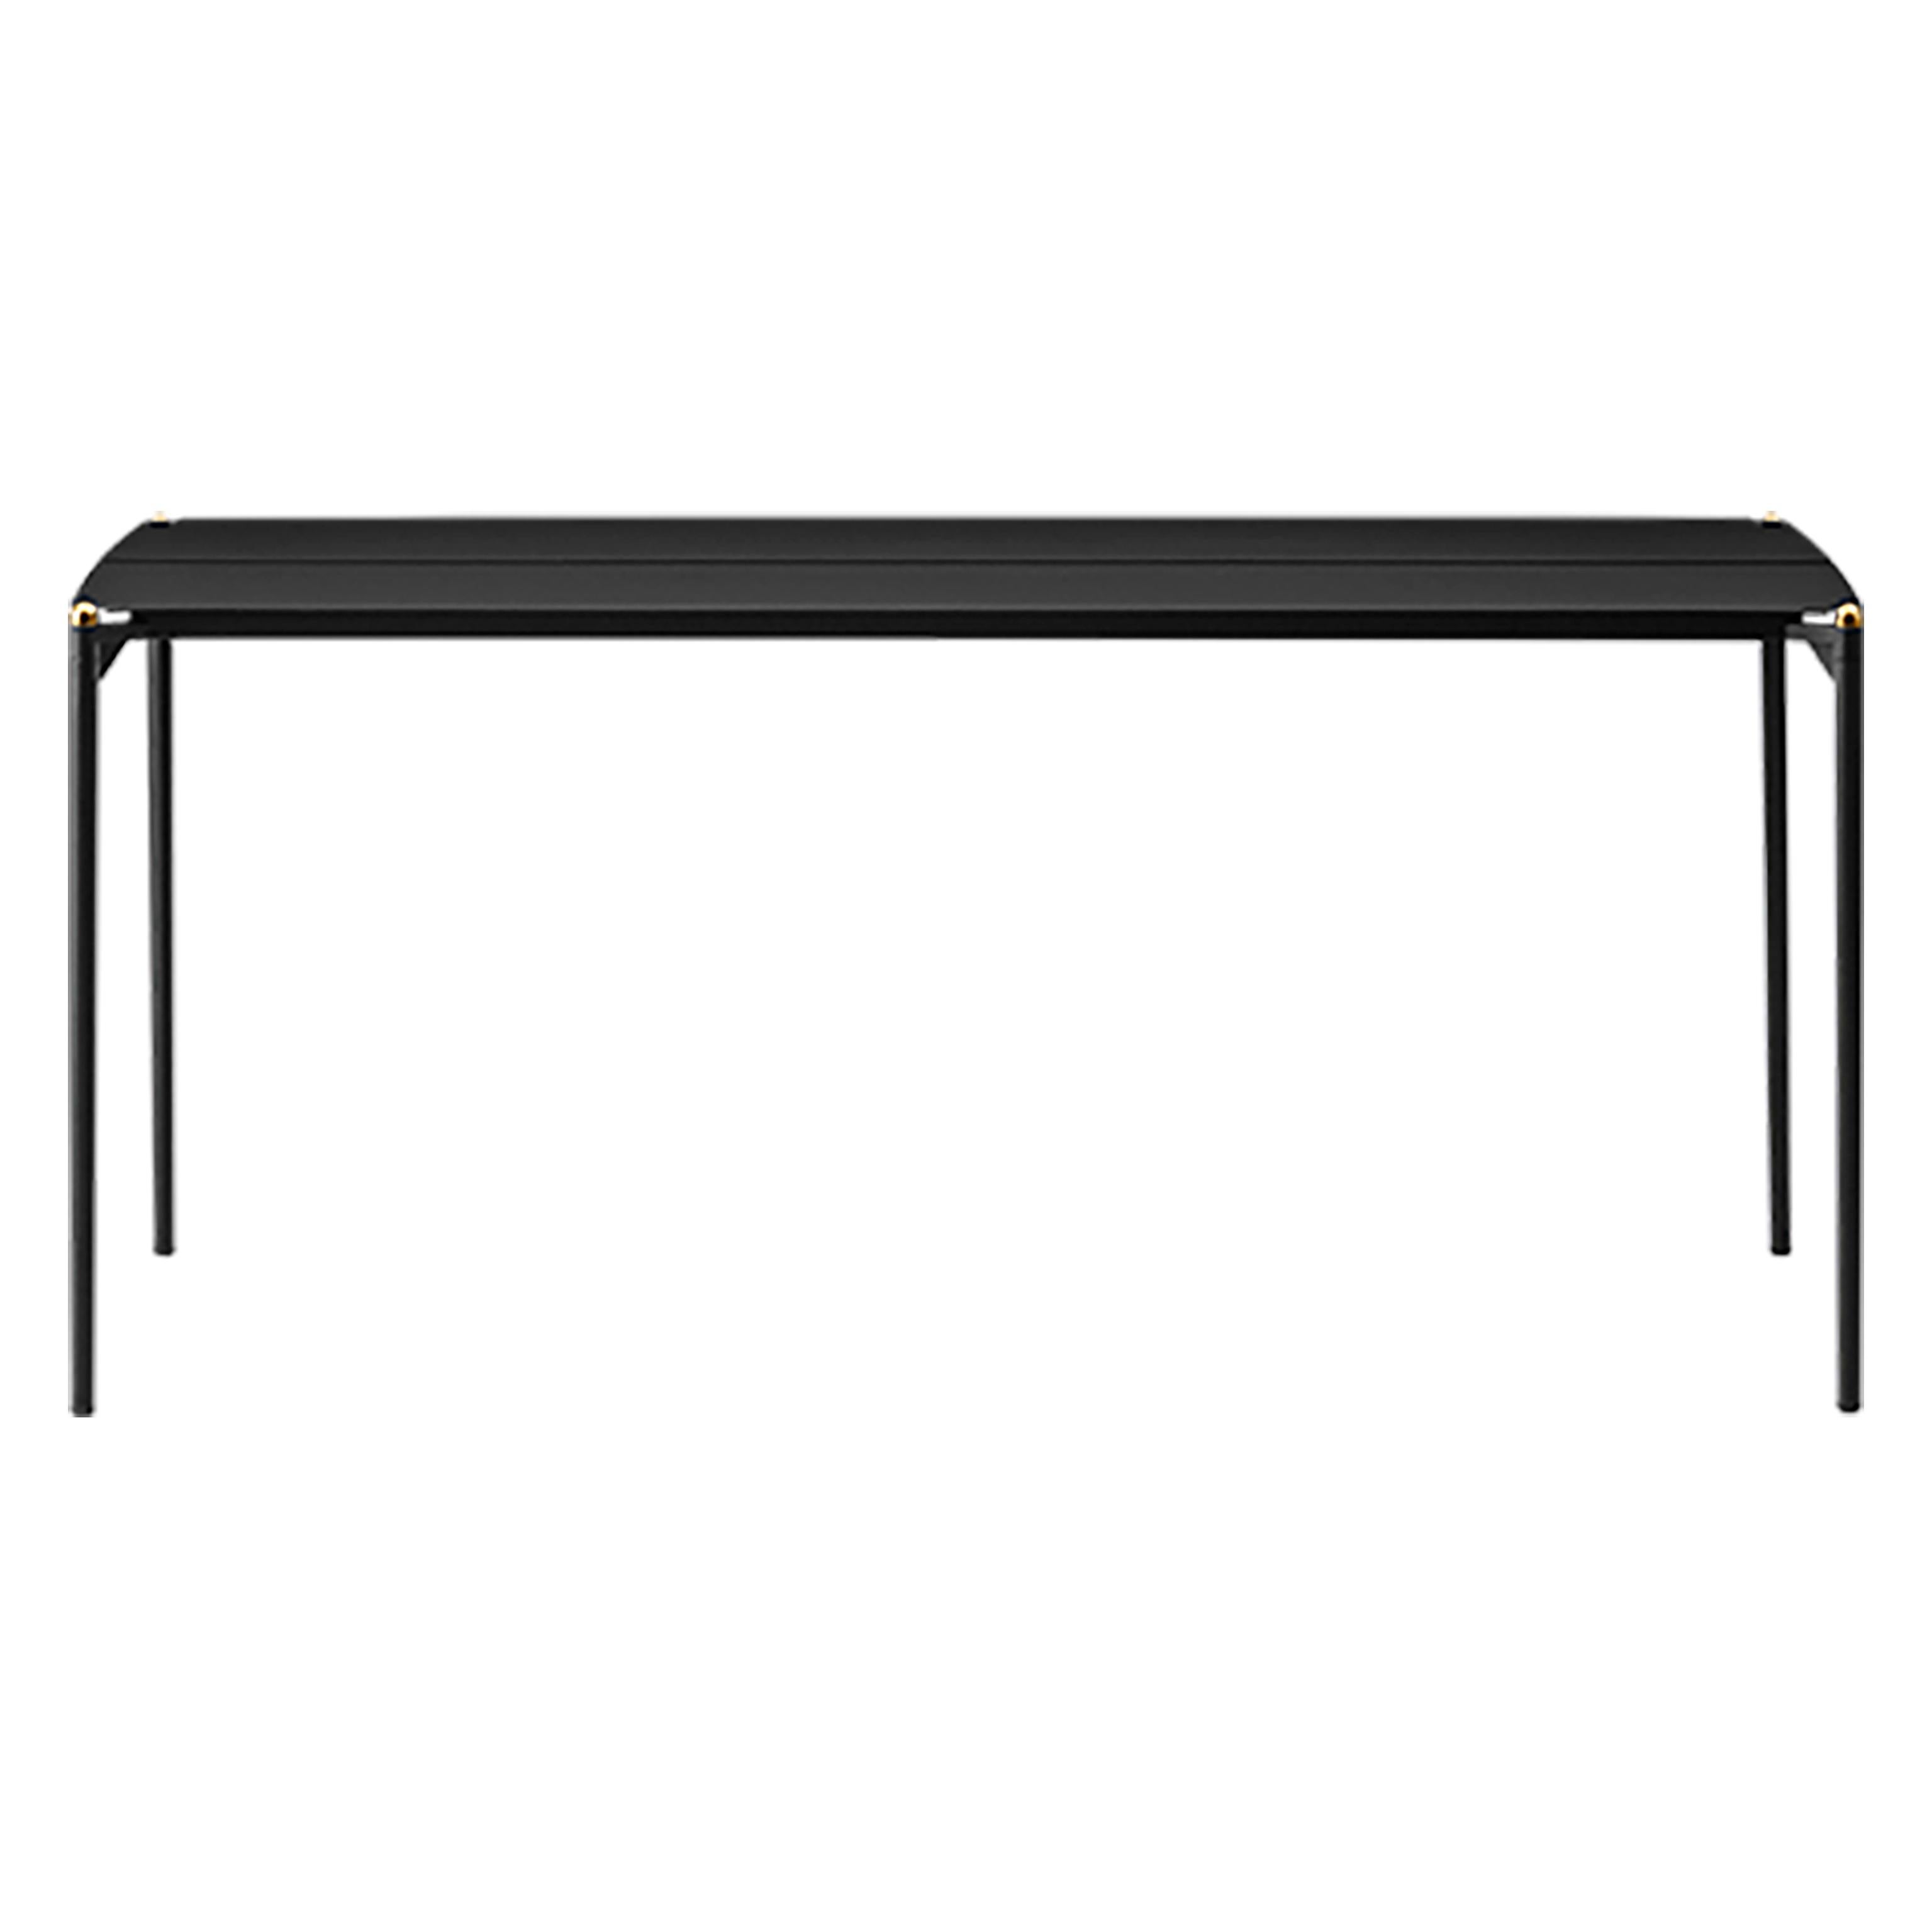 Medium black and gold table
Dimensions: D 160 x W 80 x H 72 cm 
Materials: Steel w. Matte Powder Coating, Aluminum w. Matte Powder Coating & Stainless Steel w. Gold Titanium Plating.
Available in colors: Taupe, Bordeaux, Forest, Ginger Bread,